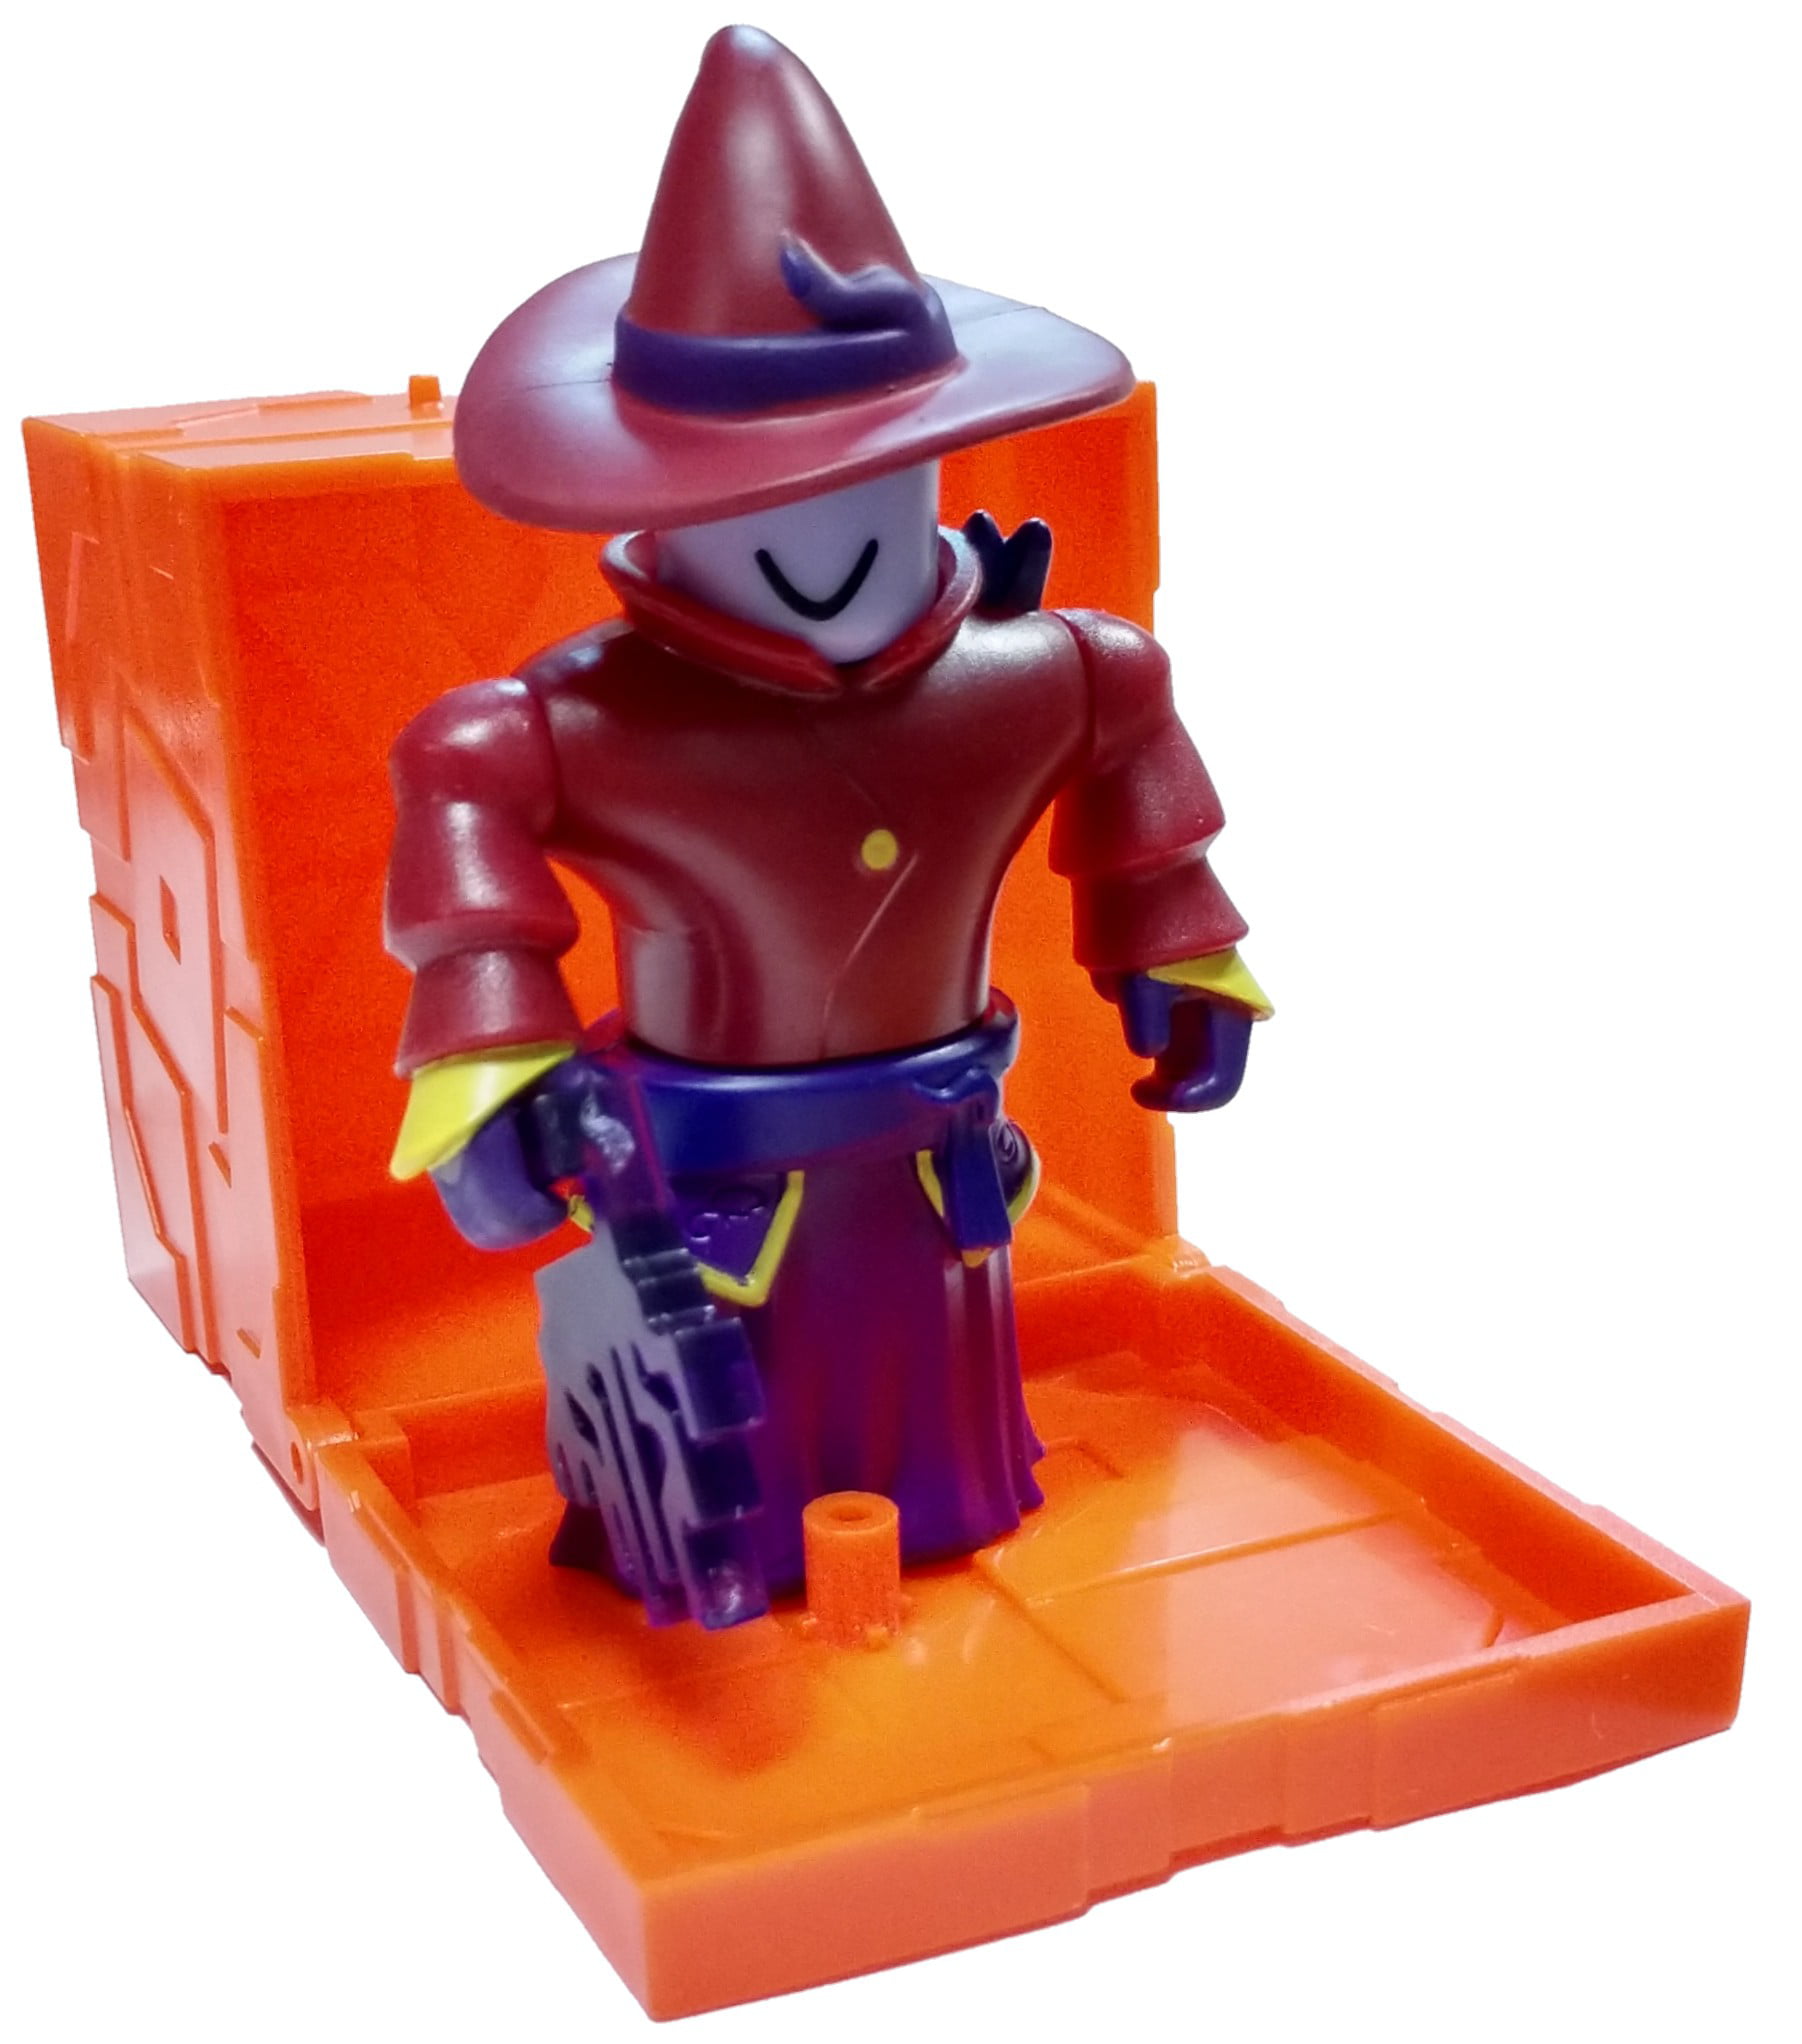 Roblox Series 6 Dread Dark Wizard Mini Figure With Orange Cube And Online Code No Packaging Walmart Com Walmart Com - dread roblox codes 2021